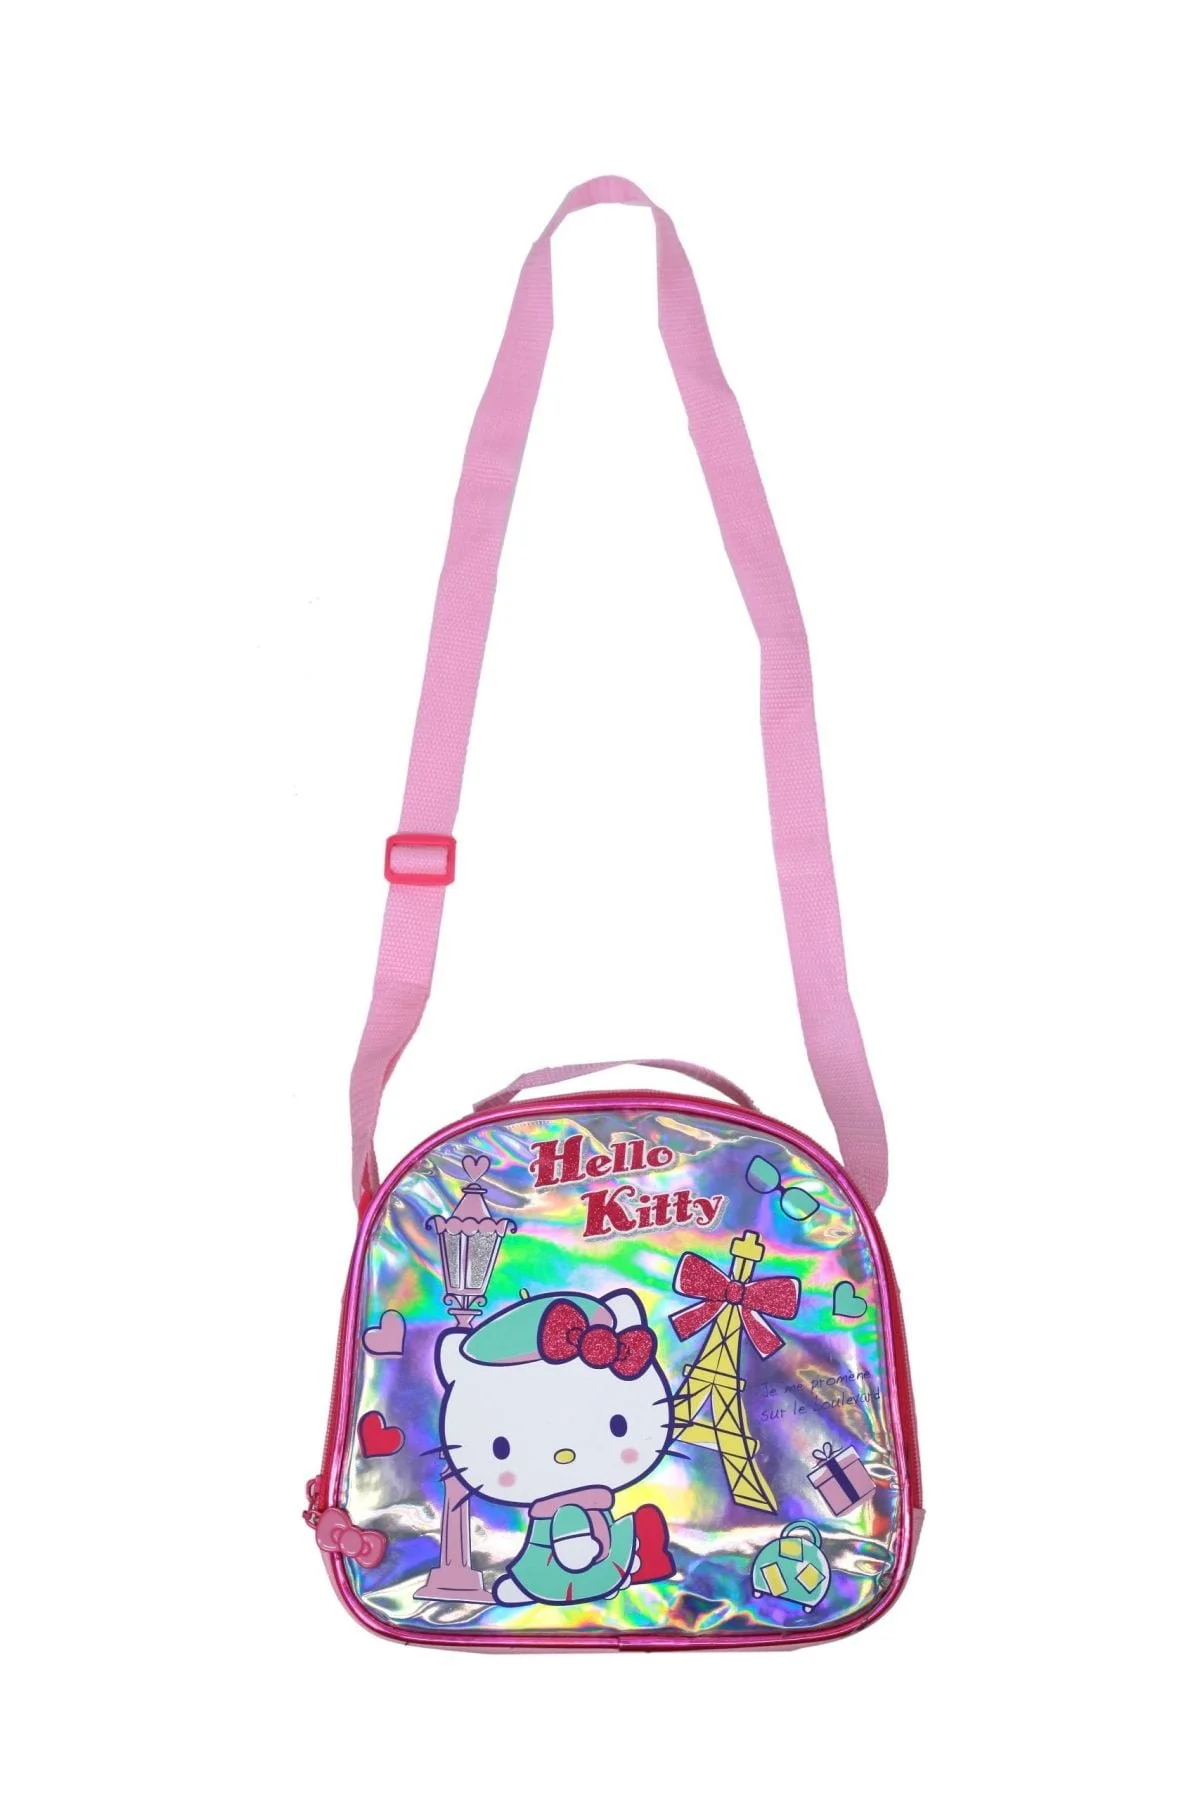 Hk672 230 1 Scaled Make Your Kids  Lunch More Fun By Using This Stylish Lunch Bag. This Spacious Bag Can Fit Most Standard Sized Lunch Boxes. Add More Flavor And Become The Center Of Attraction When You Take Out This Bag. &Lt;Ul&Gt; &Lt;Li&Gt;Stylish Lunch Bag&Lt;/Li&Gt; &Lt;Li&Gt;Spacious&Lt;/Li&Gt; &Lt;Li&Gt;Can Fit Most Standard Lunch Boxes&Lt;/Li&Gt; &Lt;/Ul&Gt; Lunch Bag Hello Kitty Insulated Lunch Bag (Hk672)